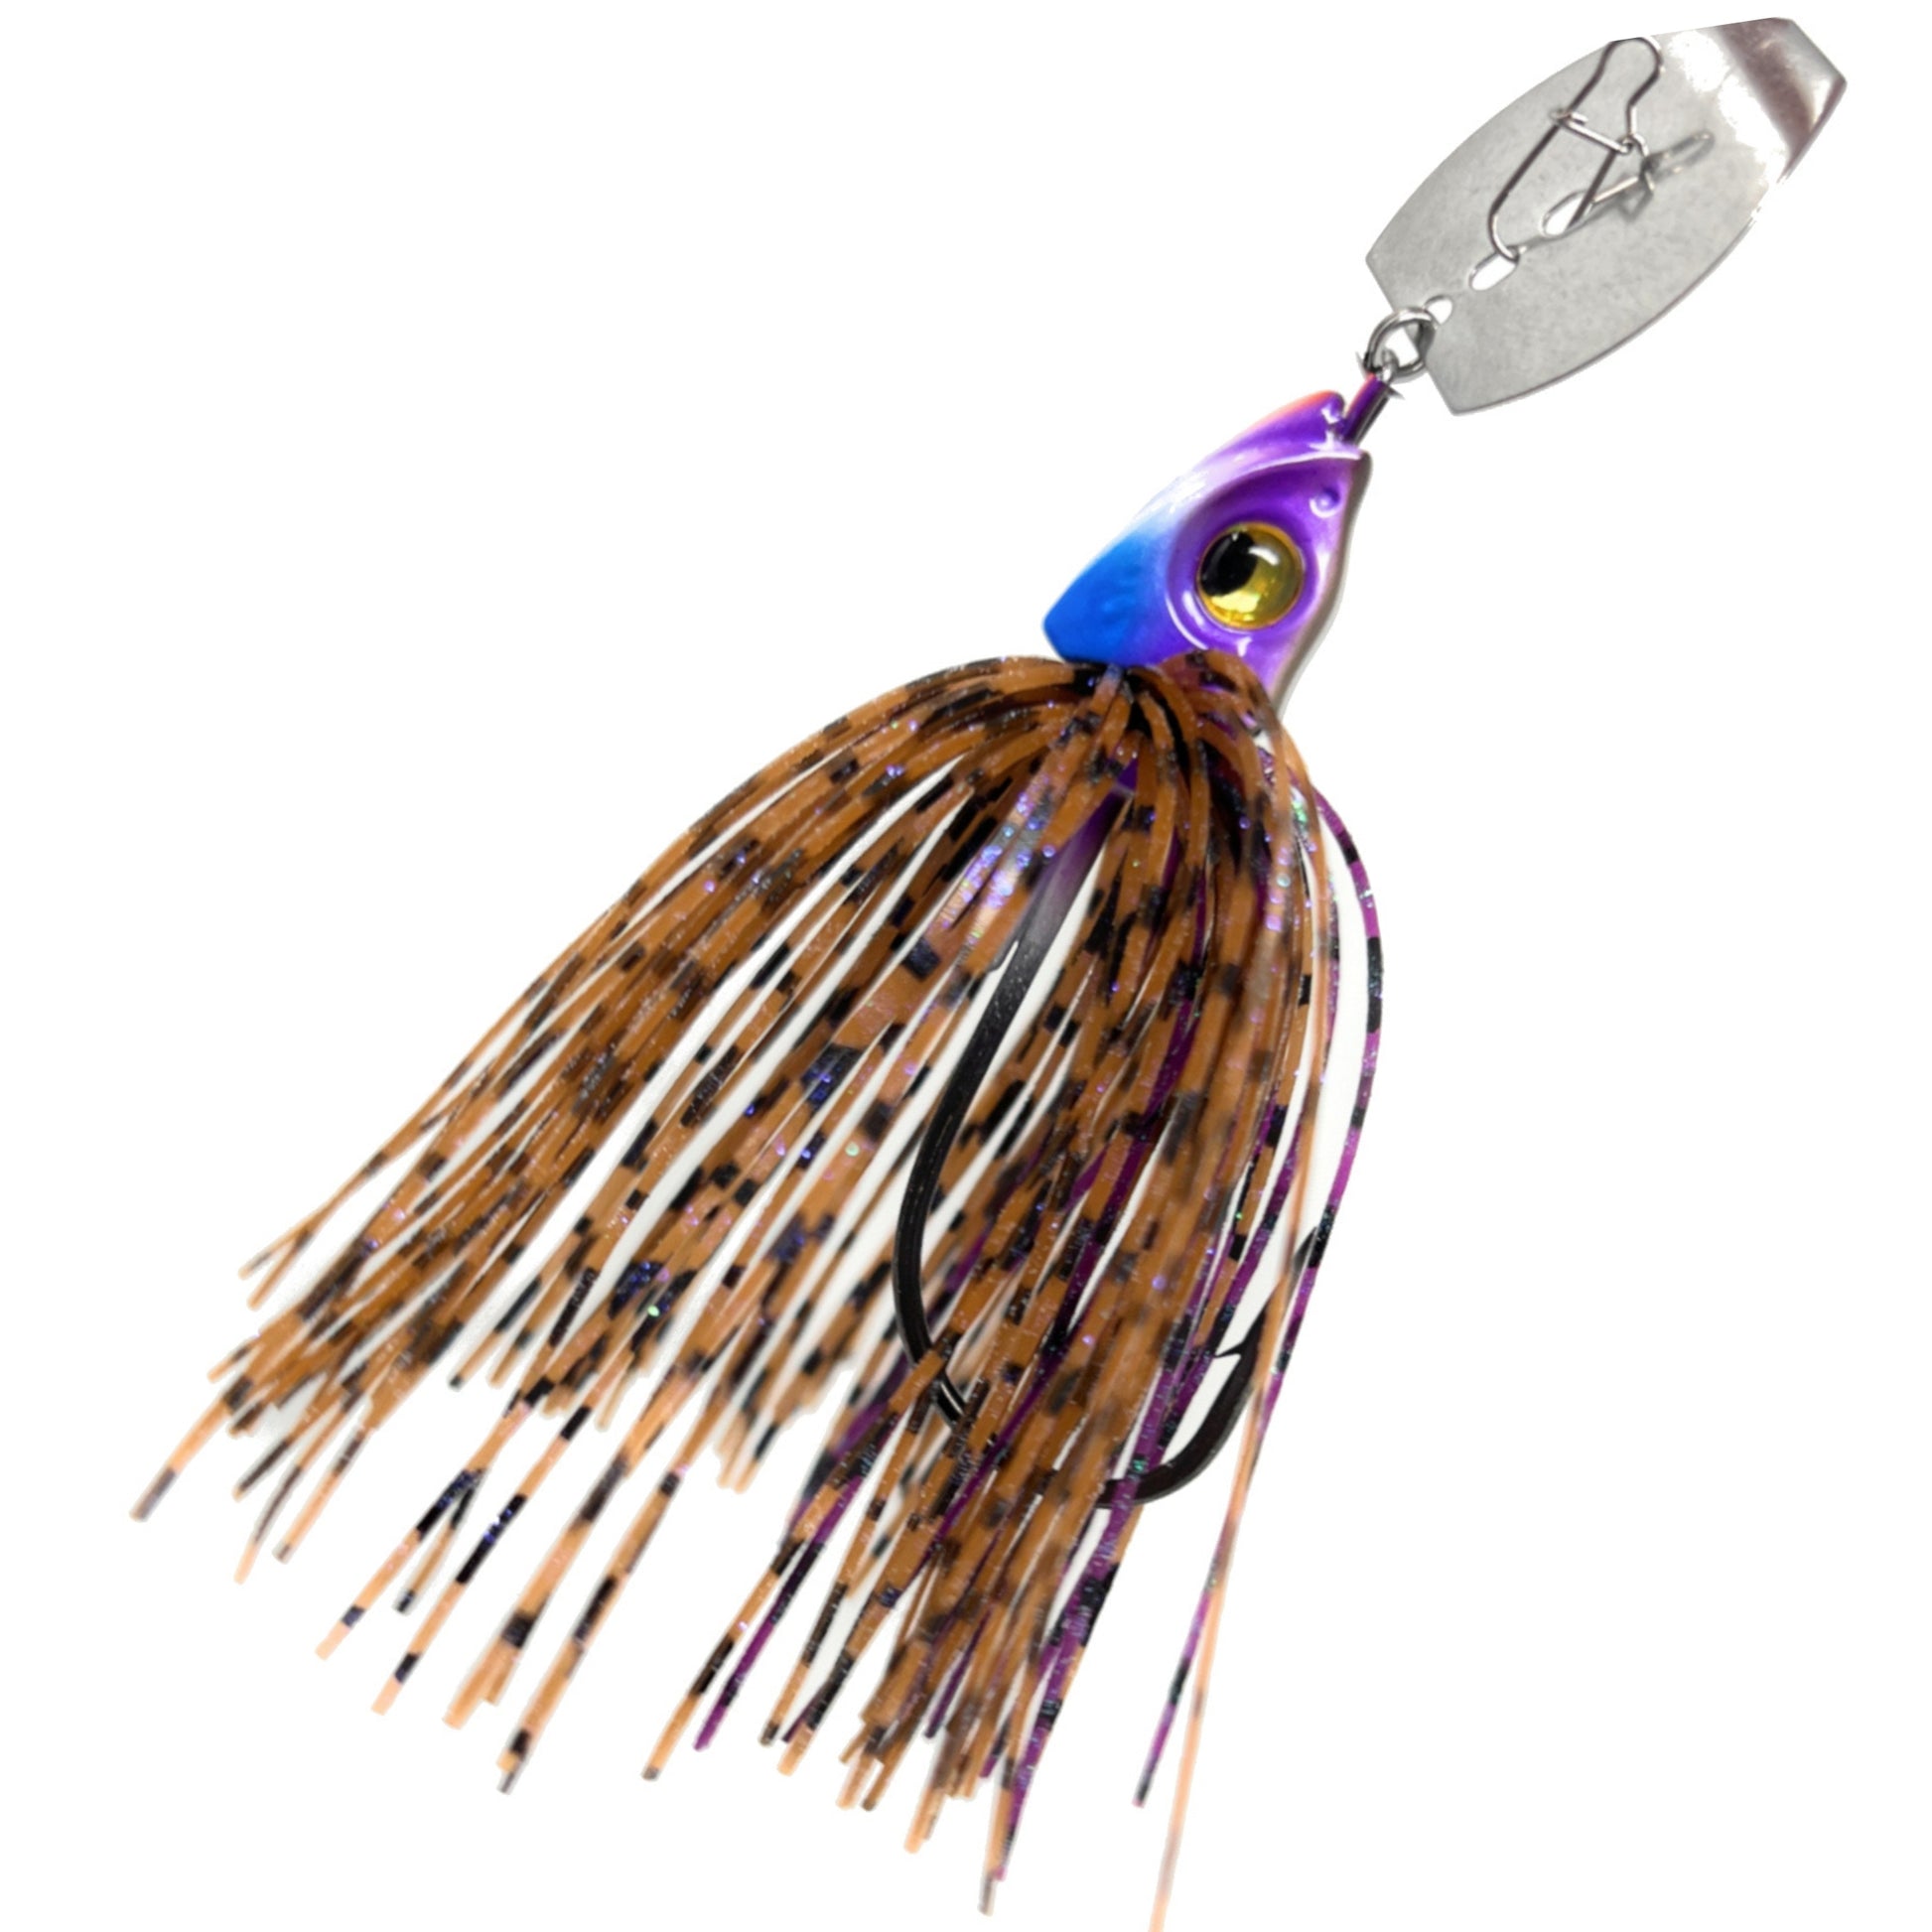 Reaction Tackle Tungsten Swim Jig for Bass Fishing - Weedless Design with  97% Pure Tungsten Jig Head and Silicone Skirt - Also for Pike, Walleye and